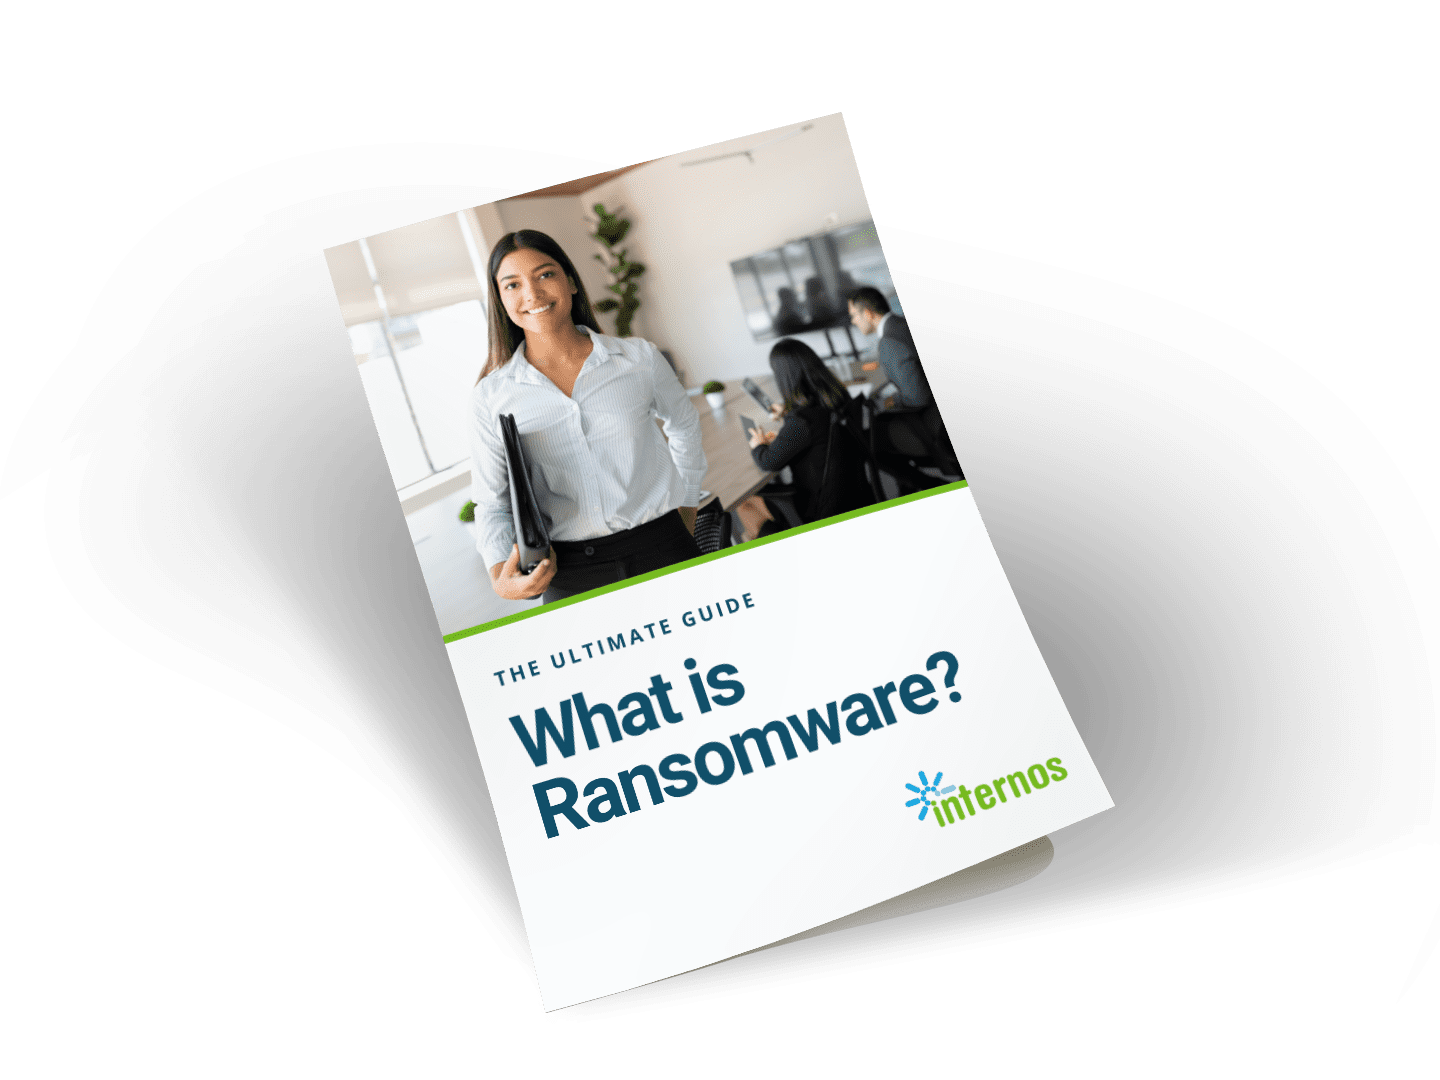 The Ultimate Ransomware Guide Promo wide